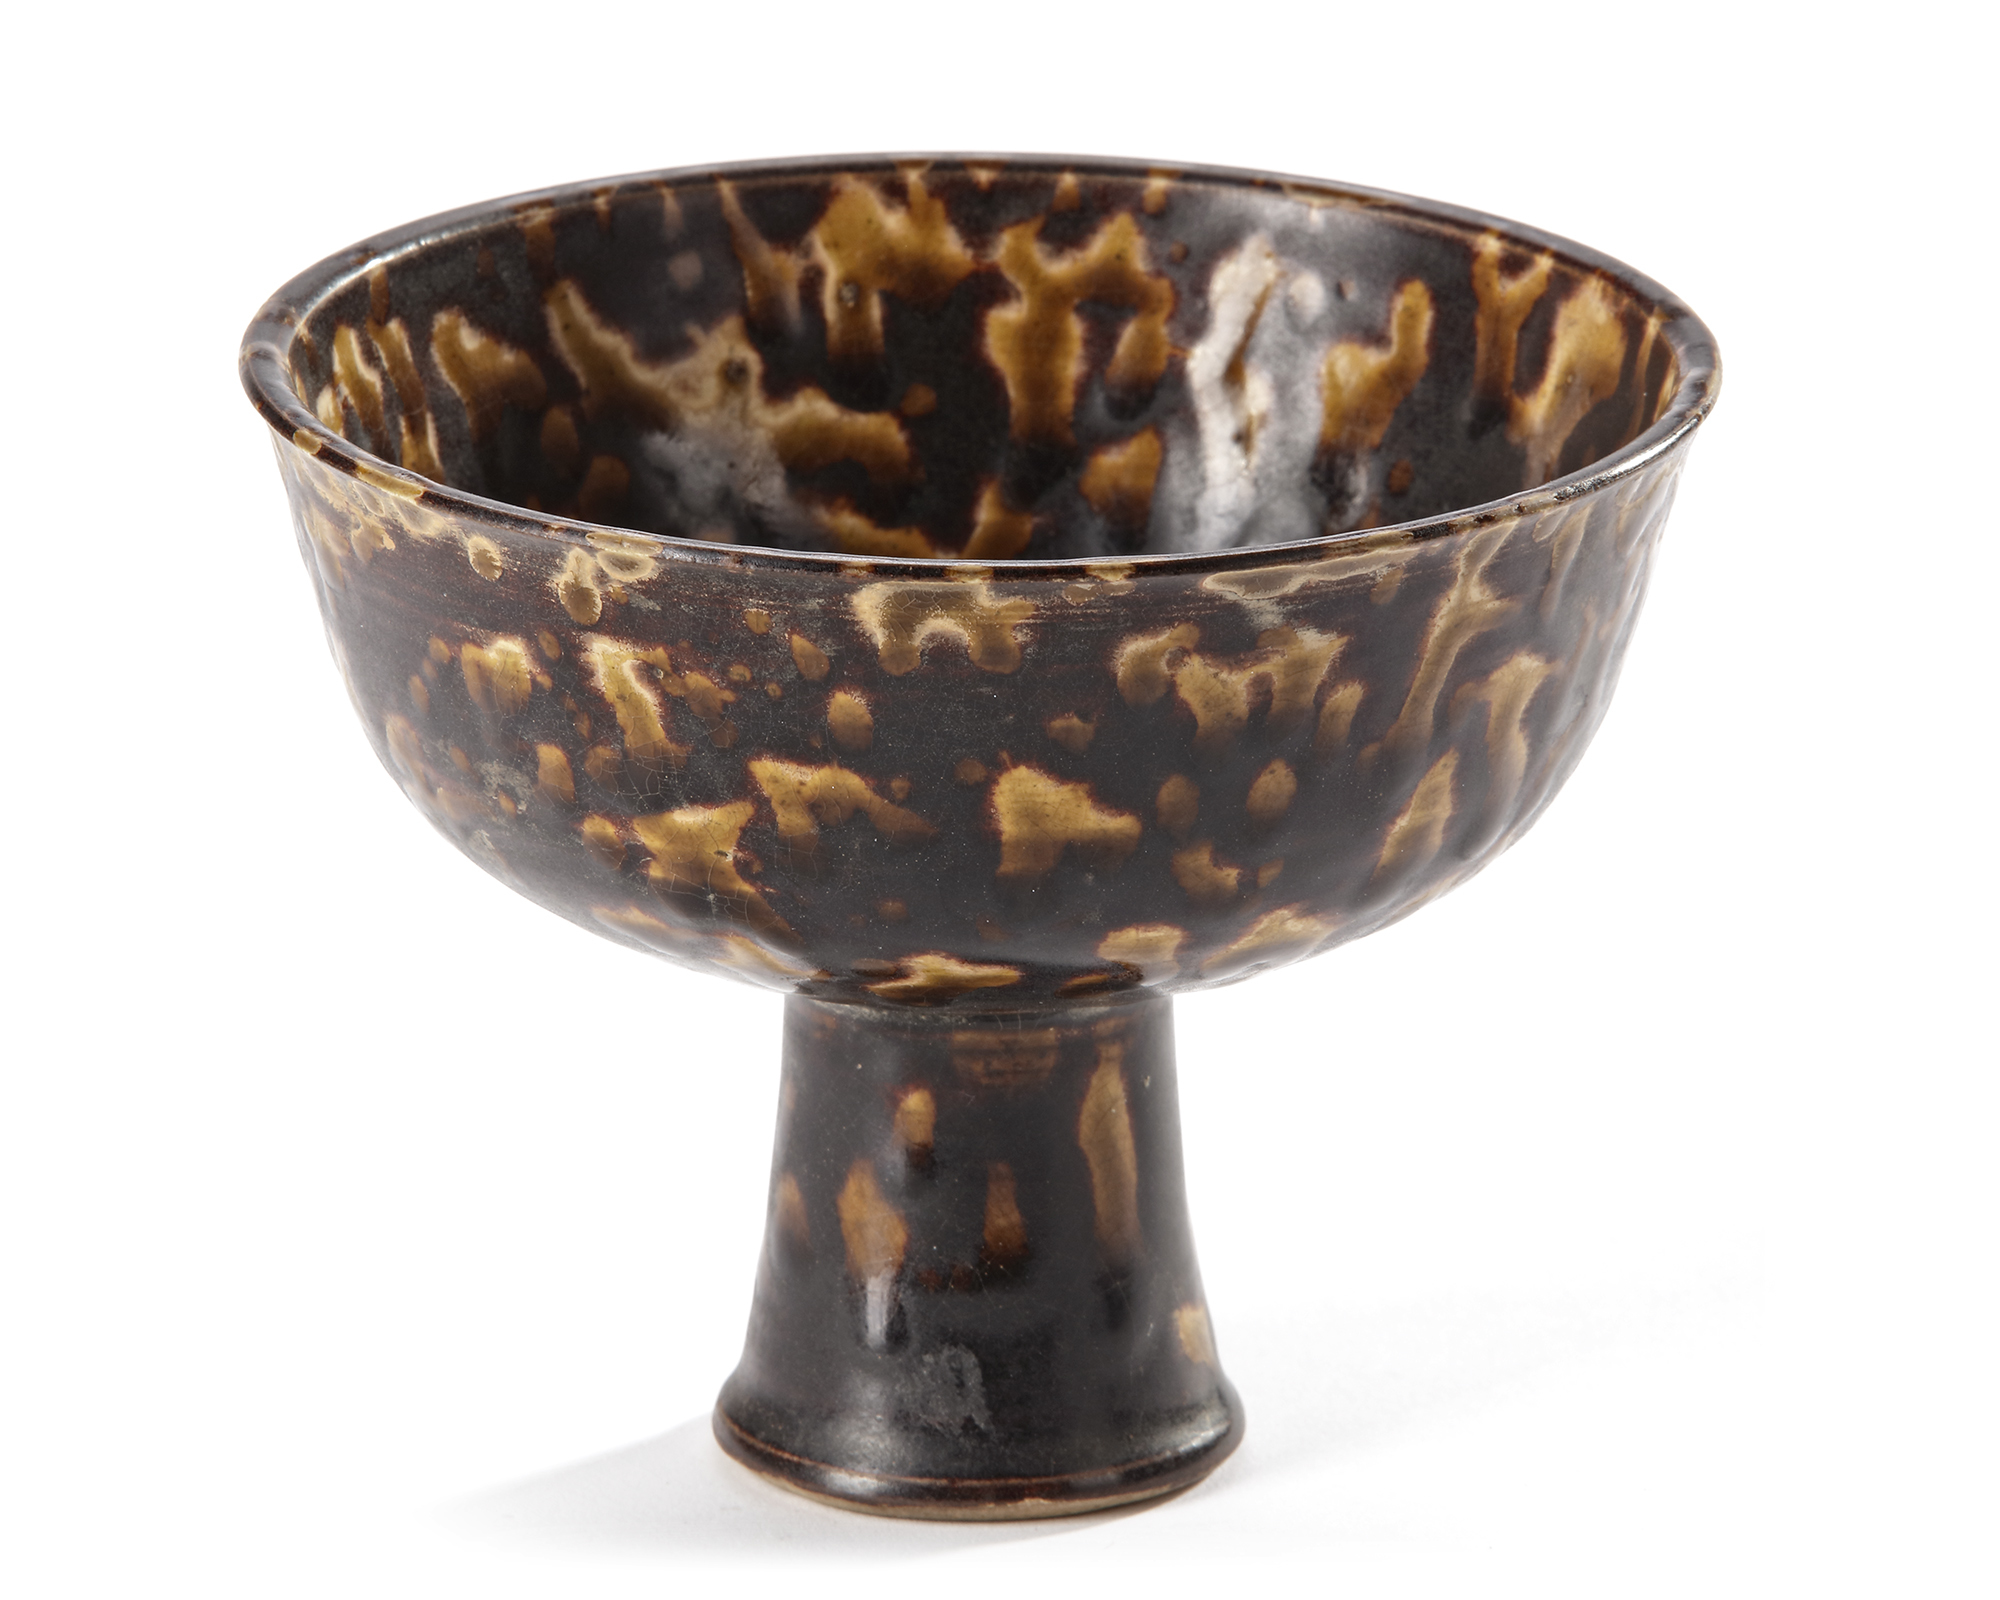 A CHINESE 'TORTOISESHELL' GLAZED STEM CUP, MING DYNASTY (1368-1644) - Image 2 of 4